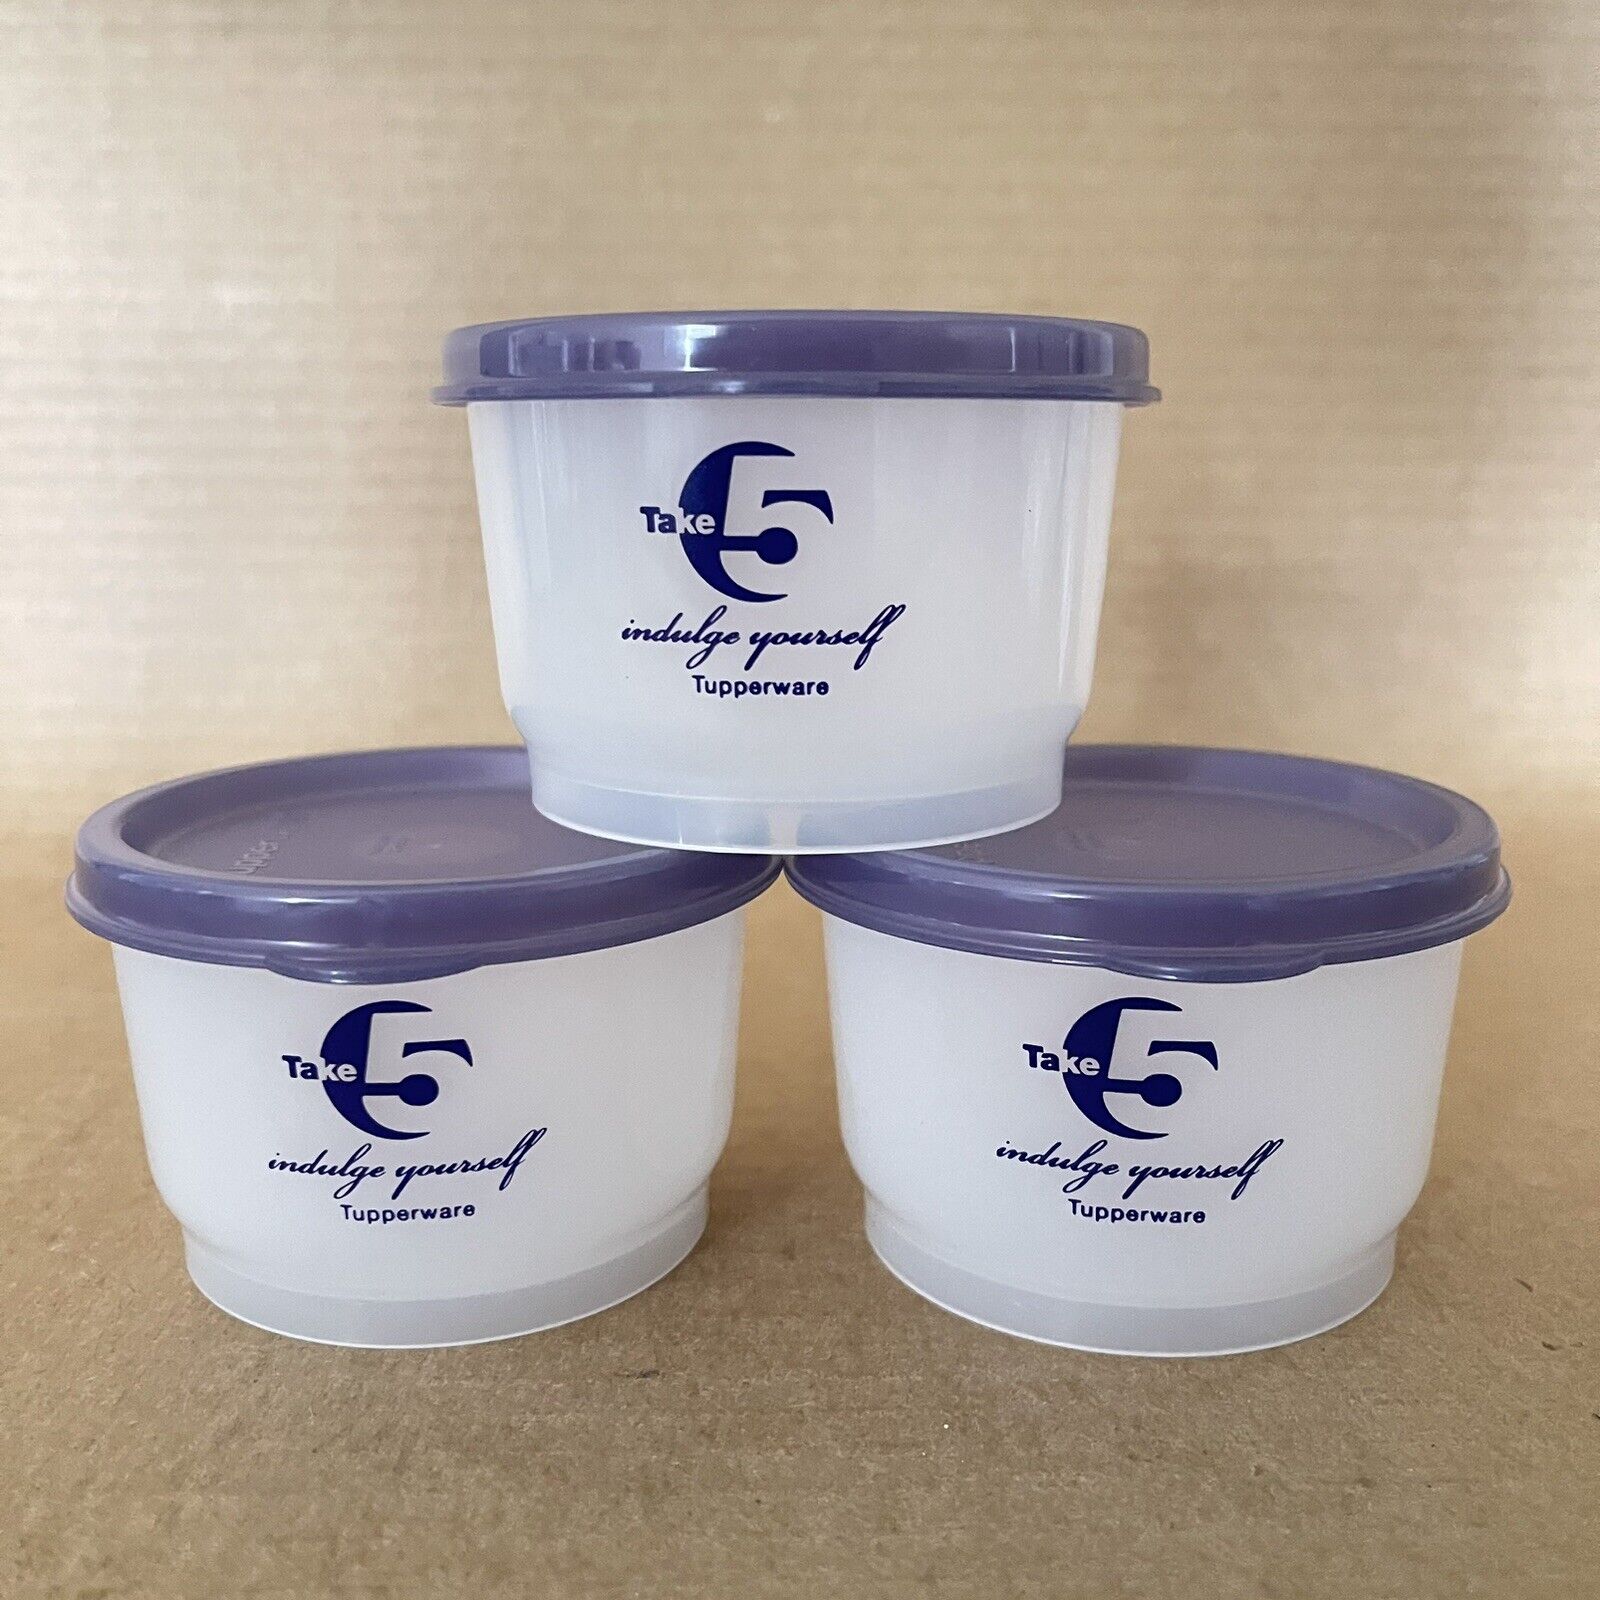 Tupperware Snack Cups Set of 3 Purple Seals 4 oz. Containers - Take 5 Logo